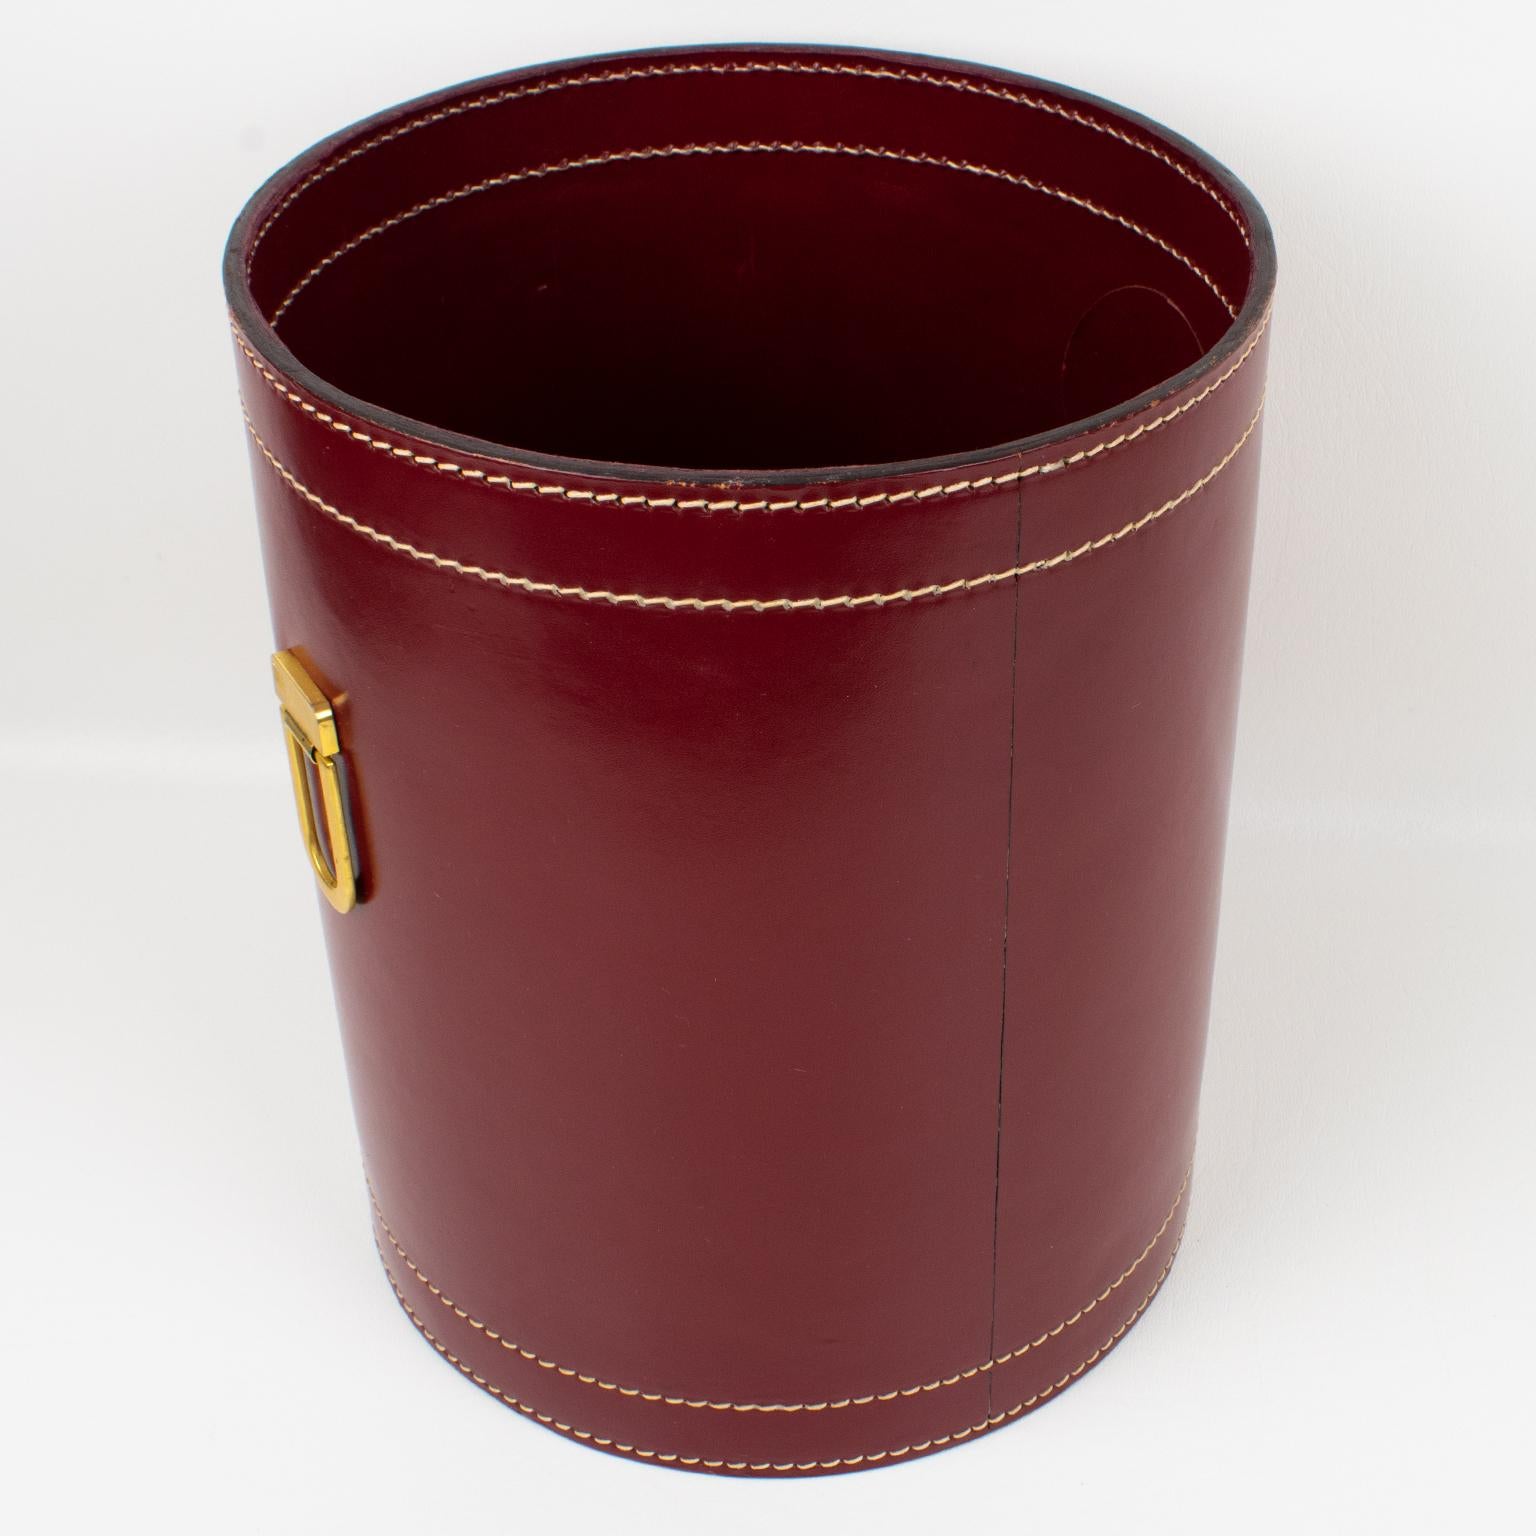 Art Deco Hand-Stitched Red Leather Desk Office Paper Waste Basket 2